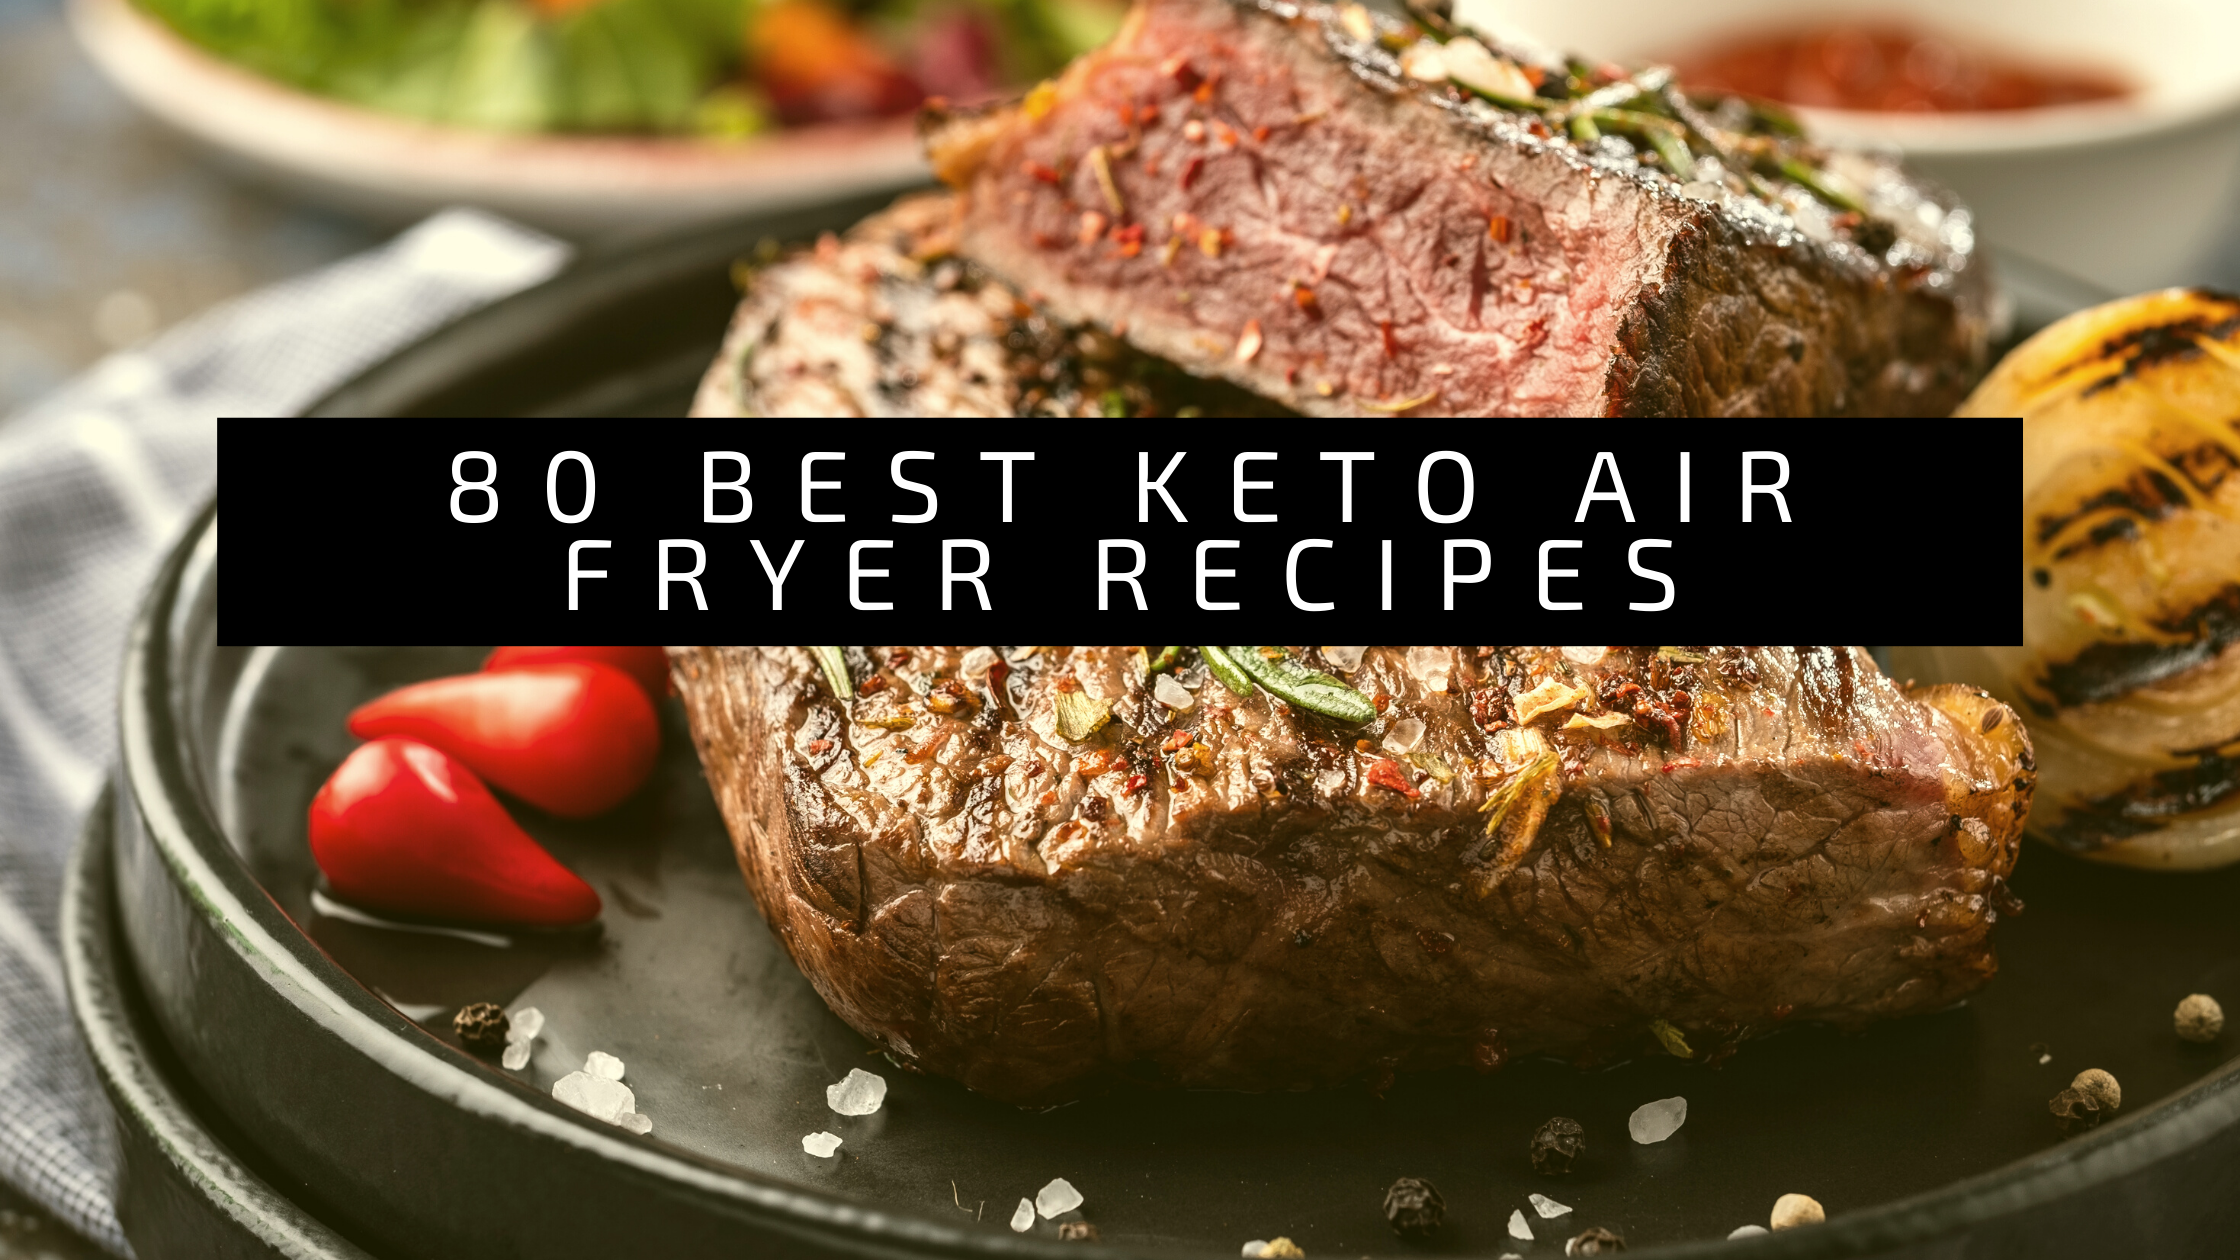 40 Family-Friendly Keto Air Fryer Recipes for Quick and Delicious Meals 22